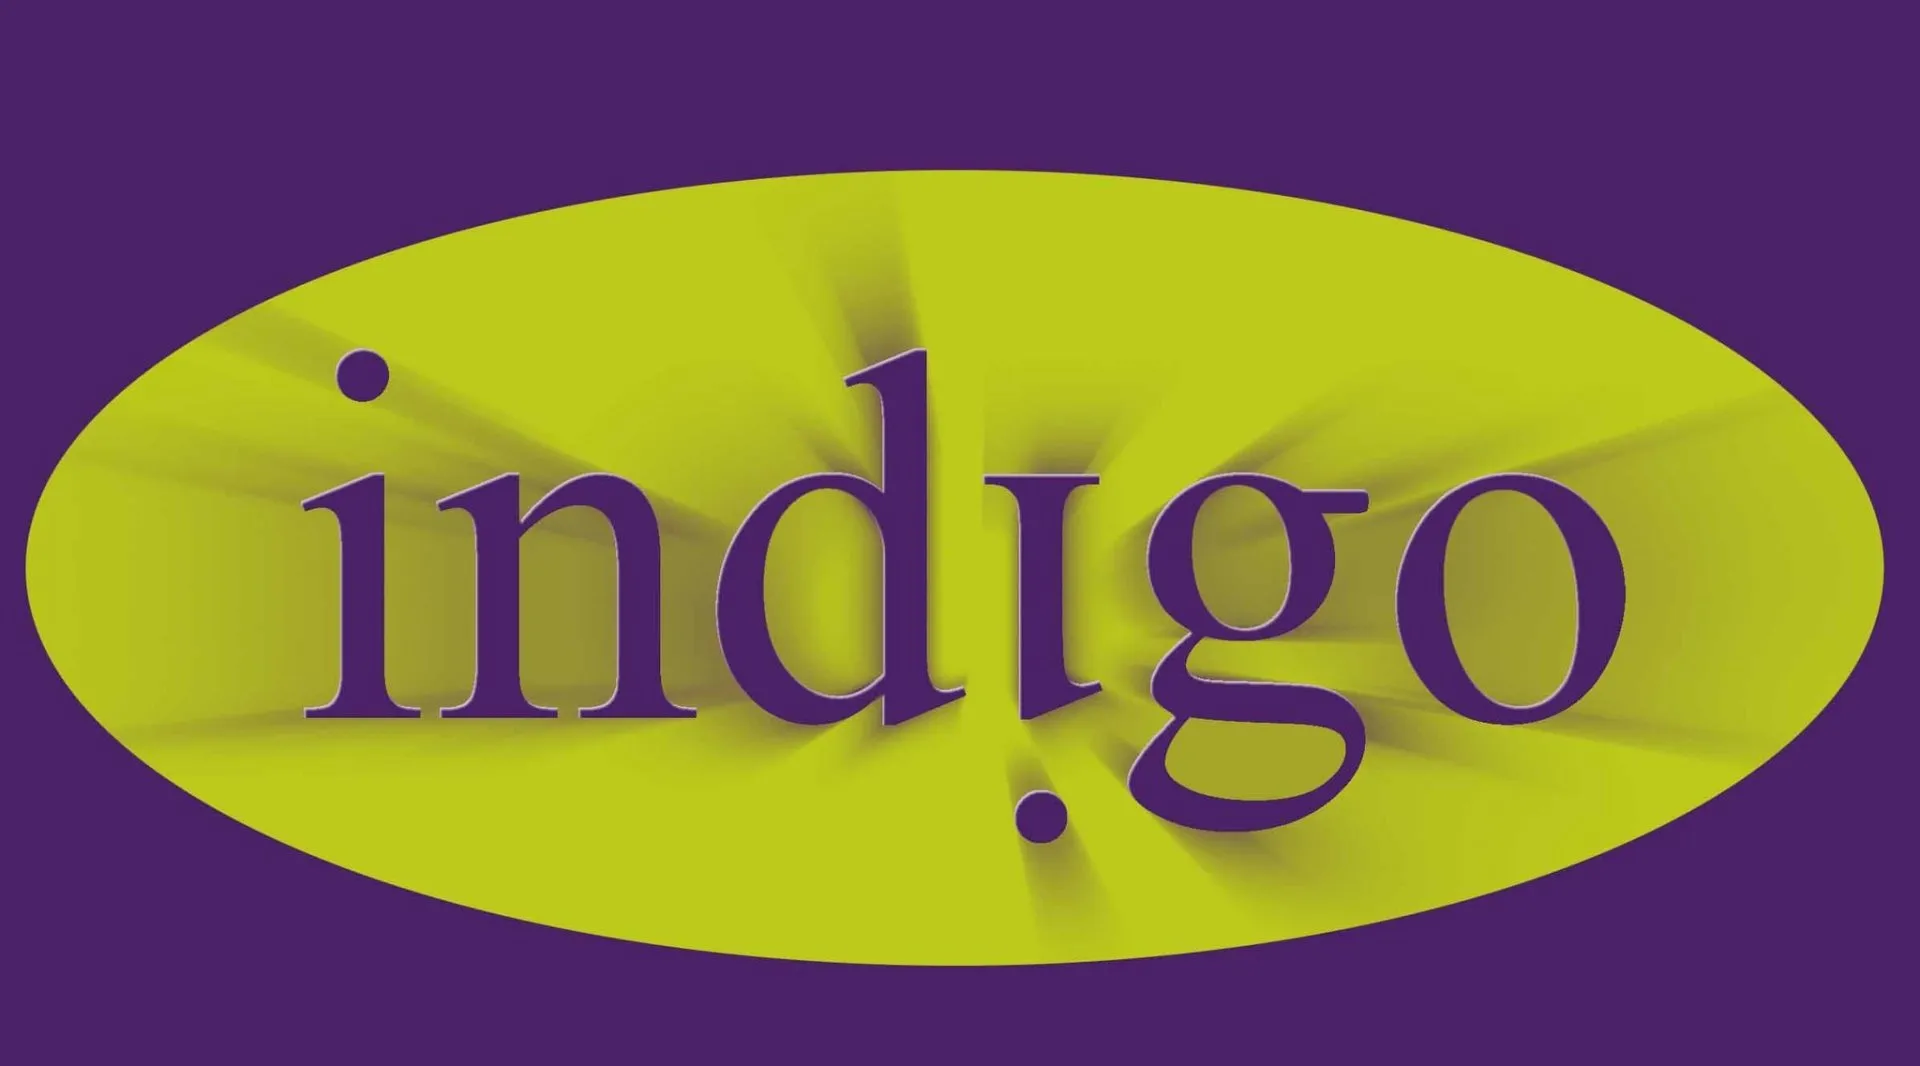 indigocourierservices.co.uk